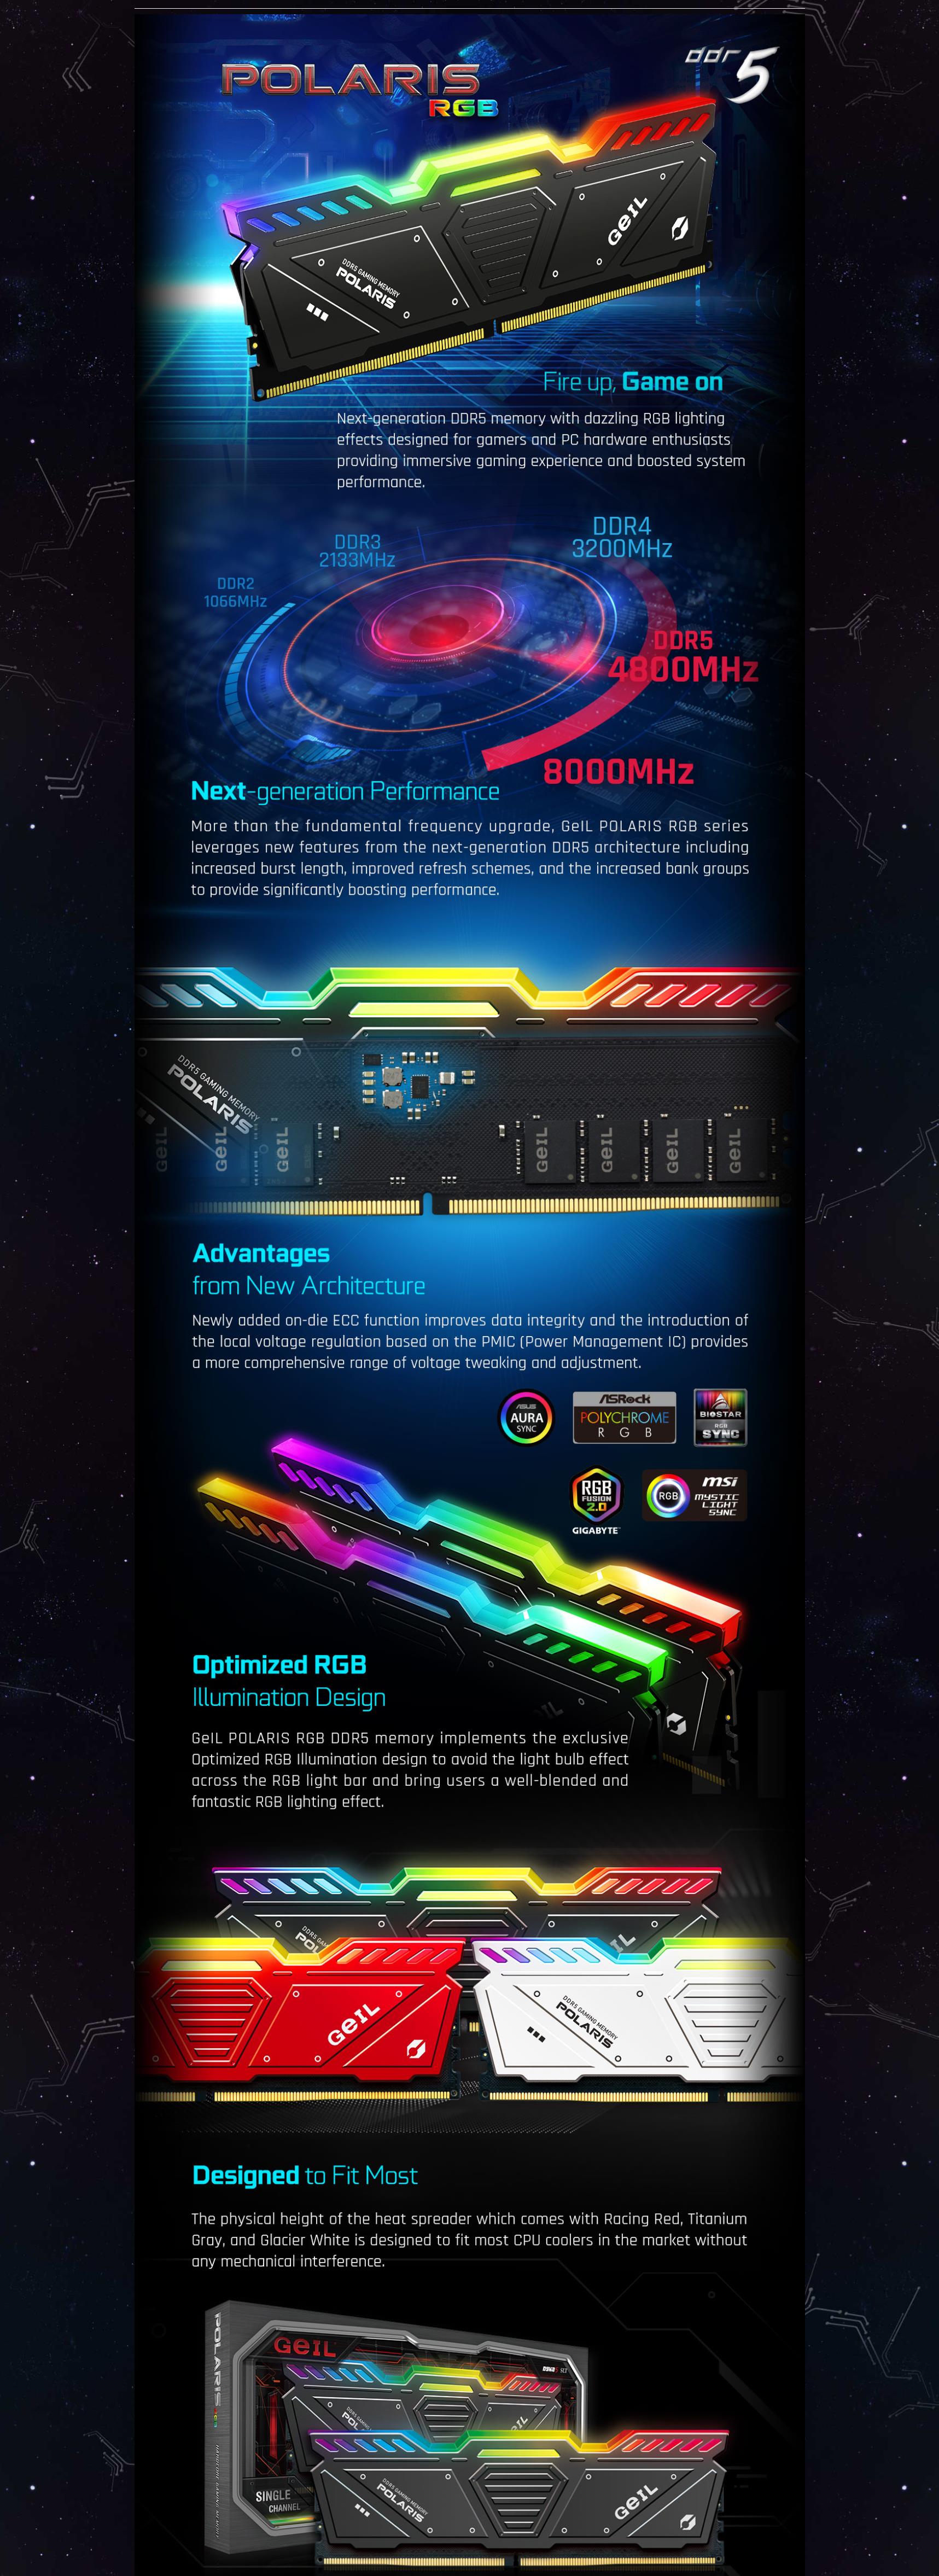 A large marketing image providing additional information about the product GeIL 32GB Kit (2x16GB) DDR5 Polaris AMD Edition RGB C38 6000MHz - Grey - Additional alt info not provided